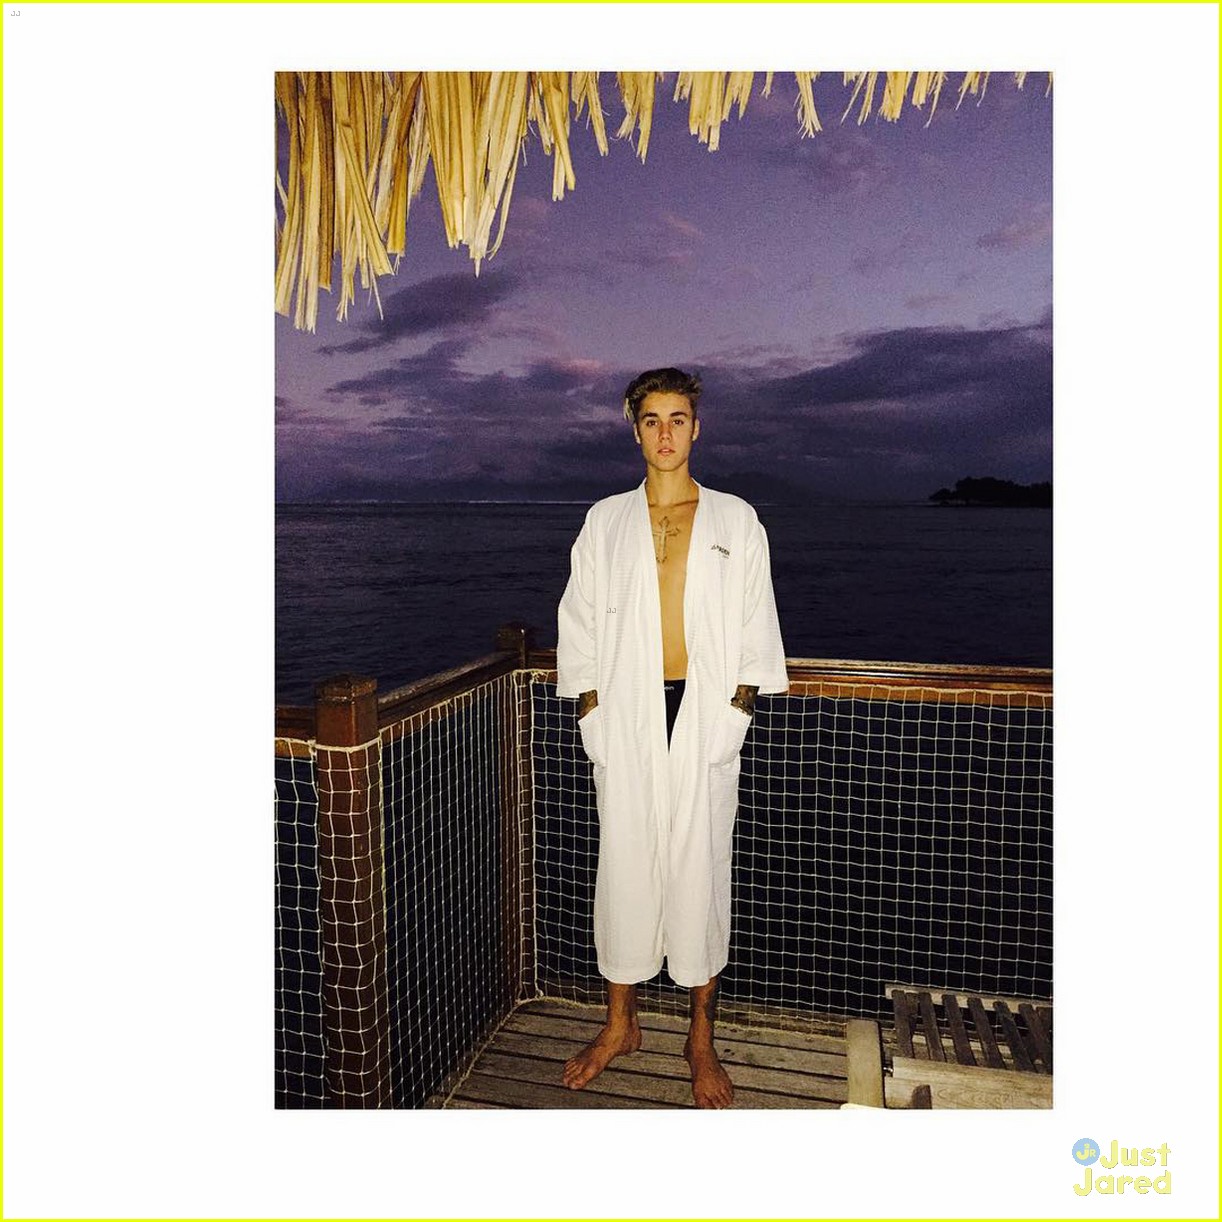 justin bieber goes butt naked in instagram photo 05